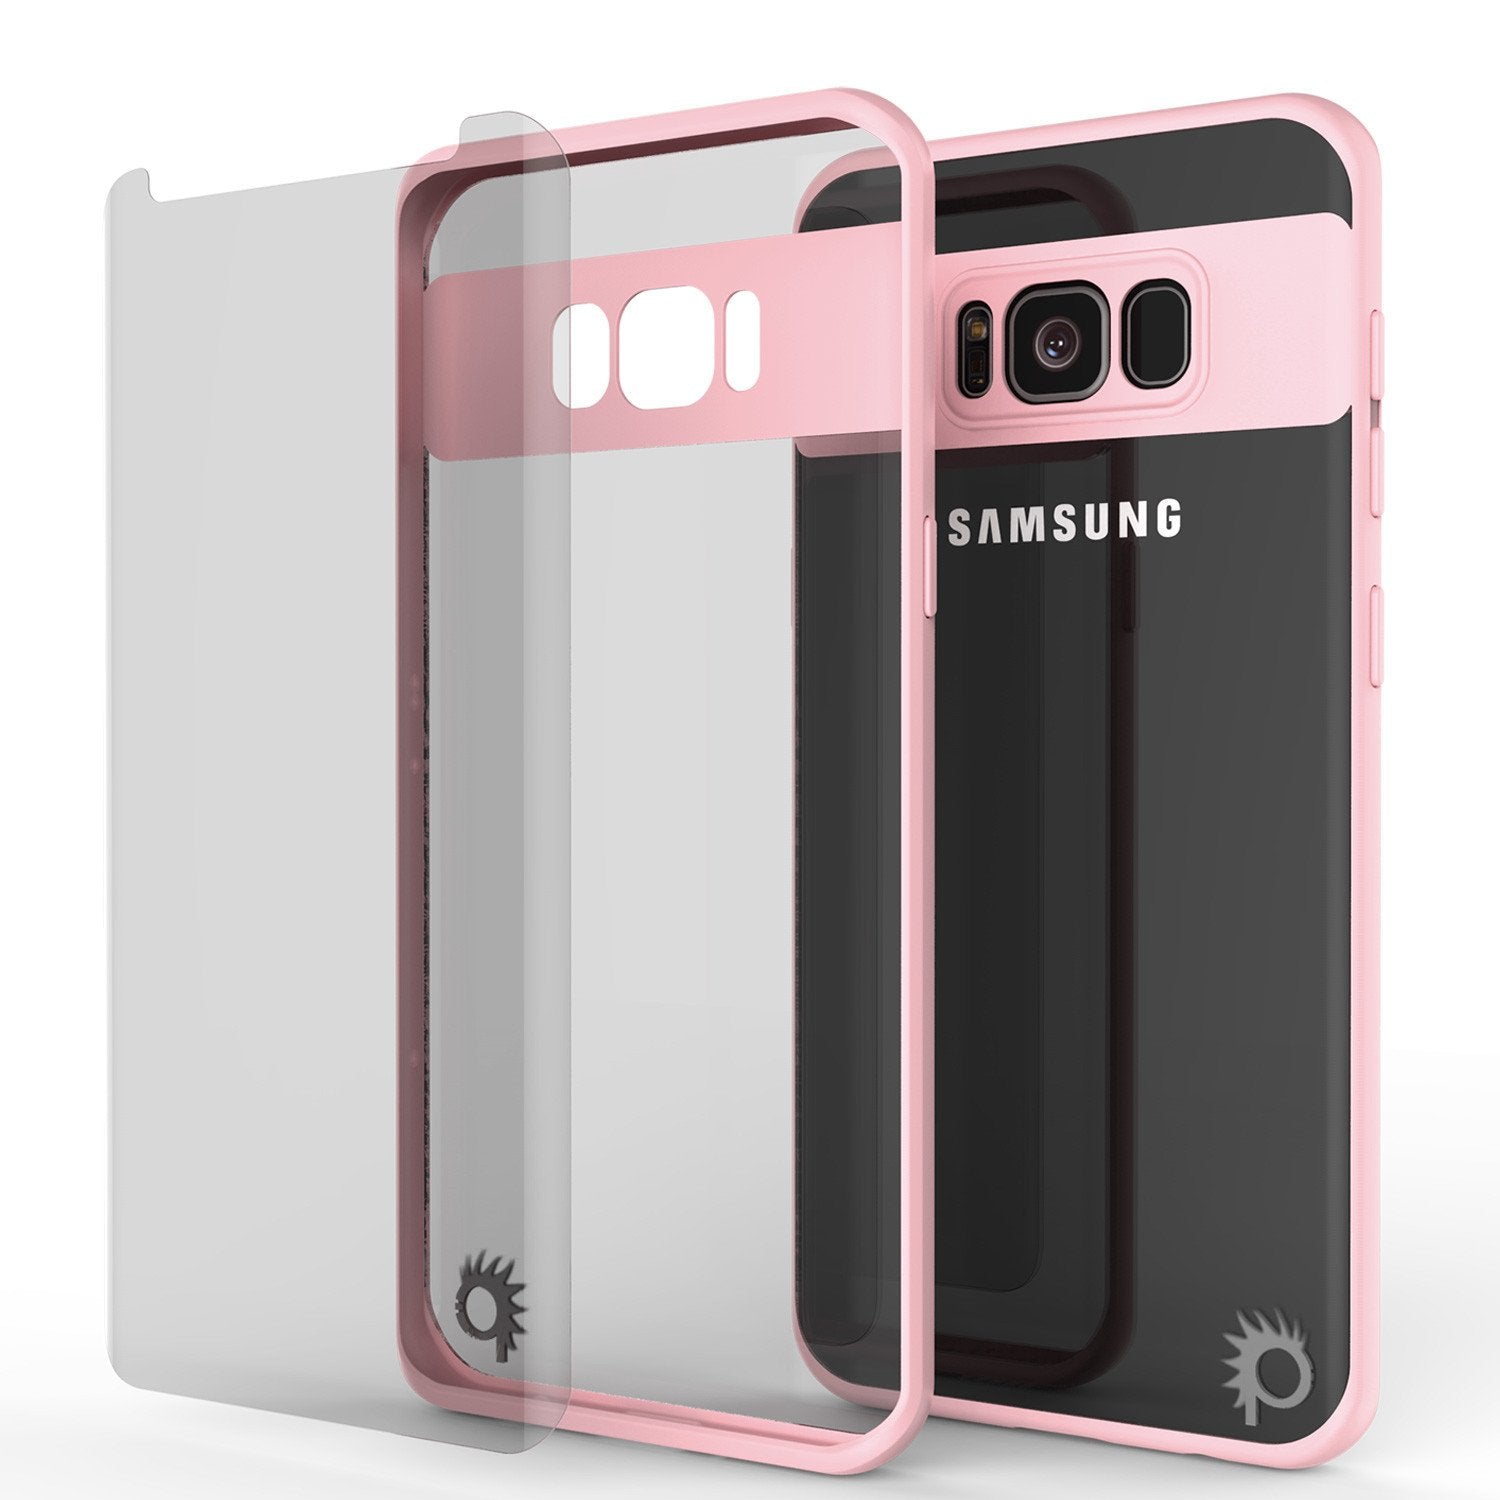 Galaxy S8 Case, Punkcase [MASK Series] [PINK] Full Body Hybrid Dual Layer TPU Cover W/ Protective PUNKSHIELD Screen Protector - PunkCase NZ